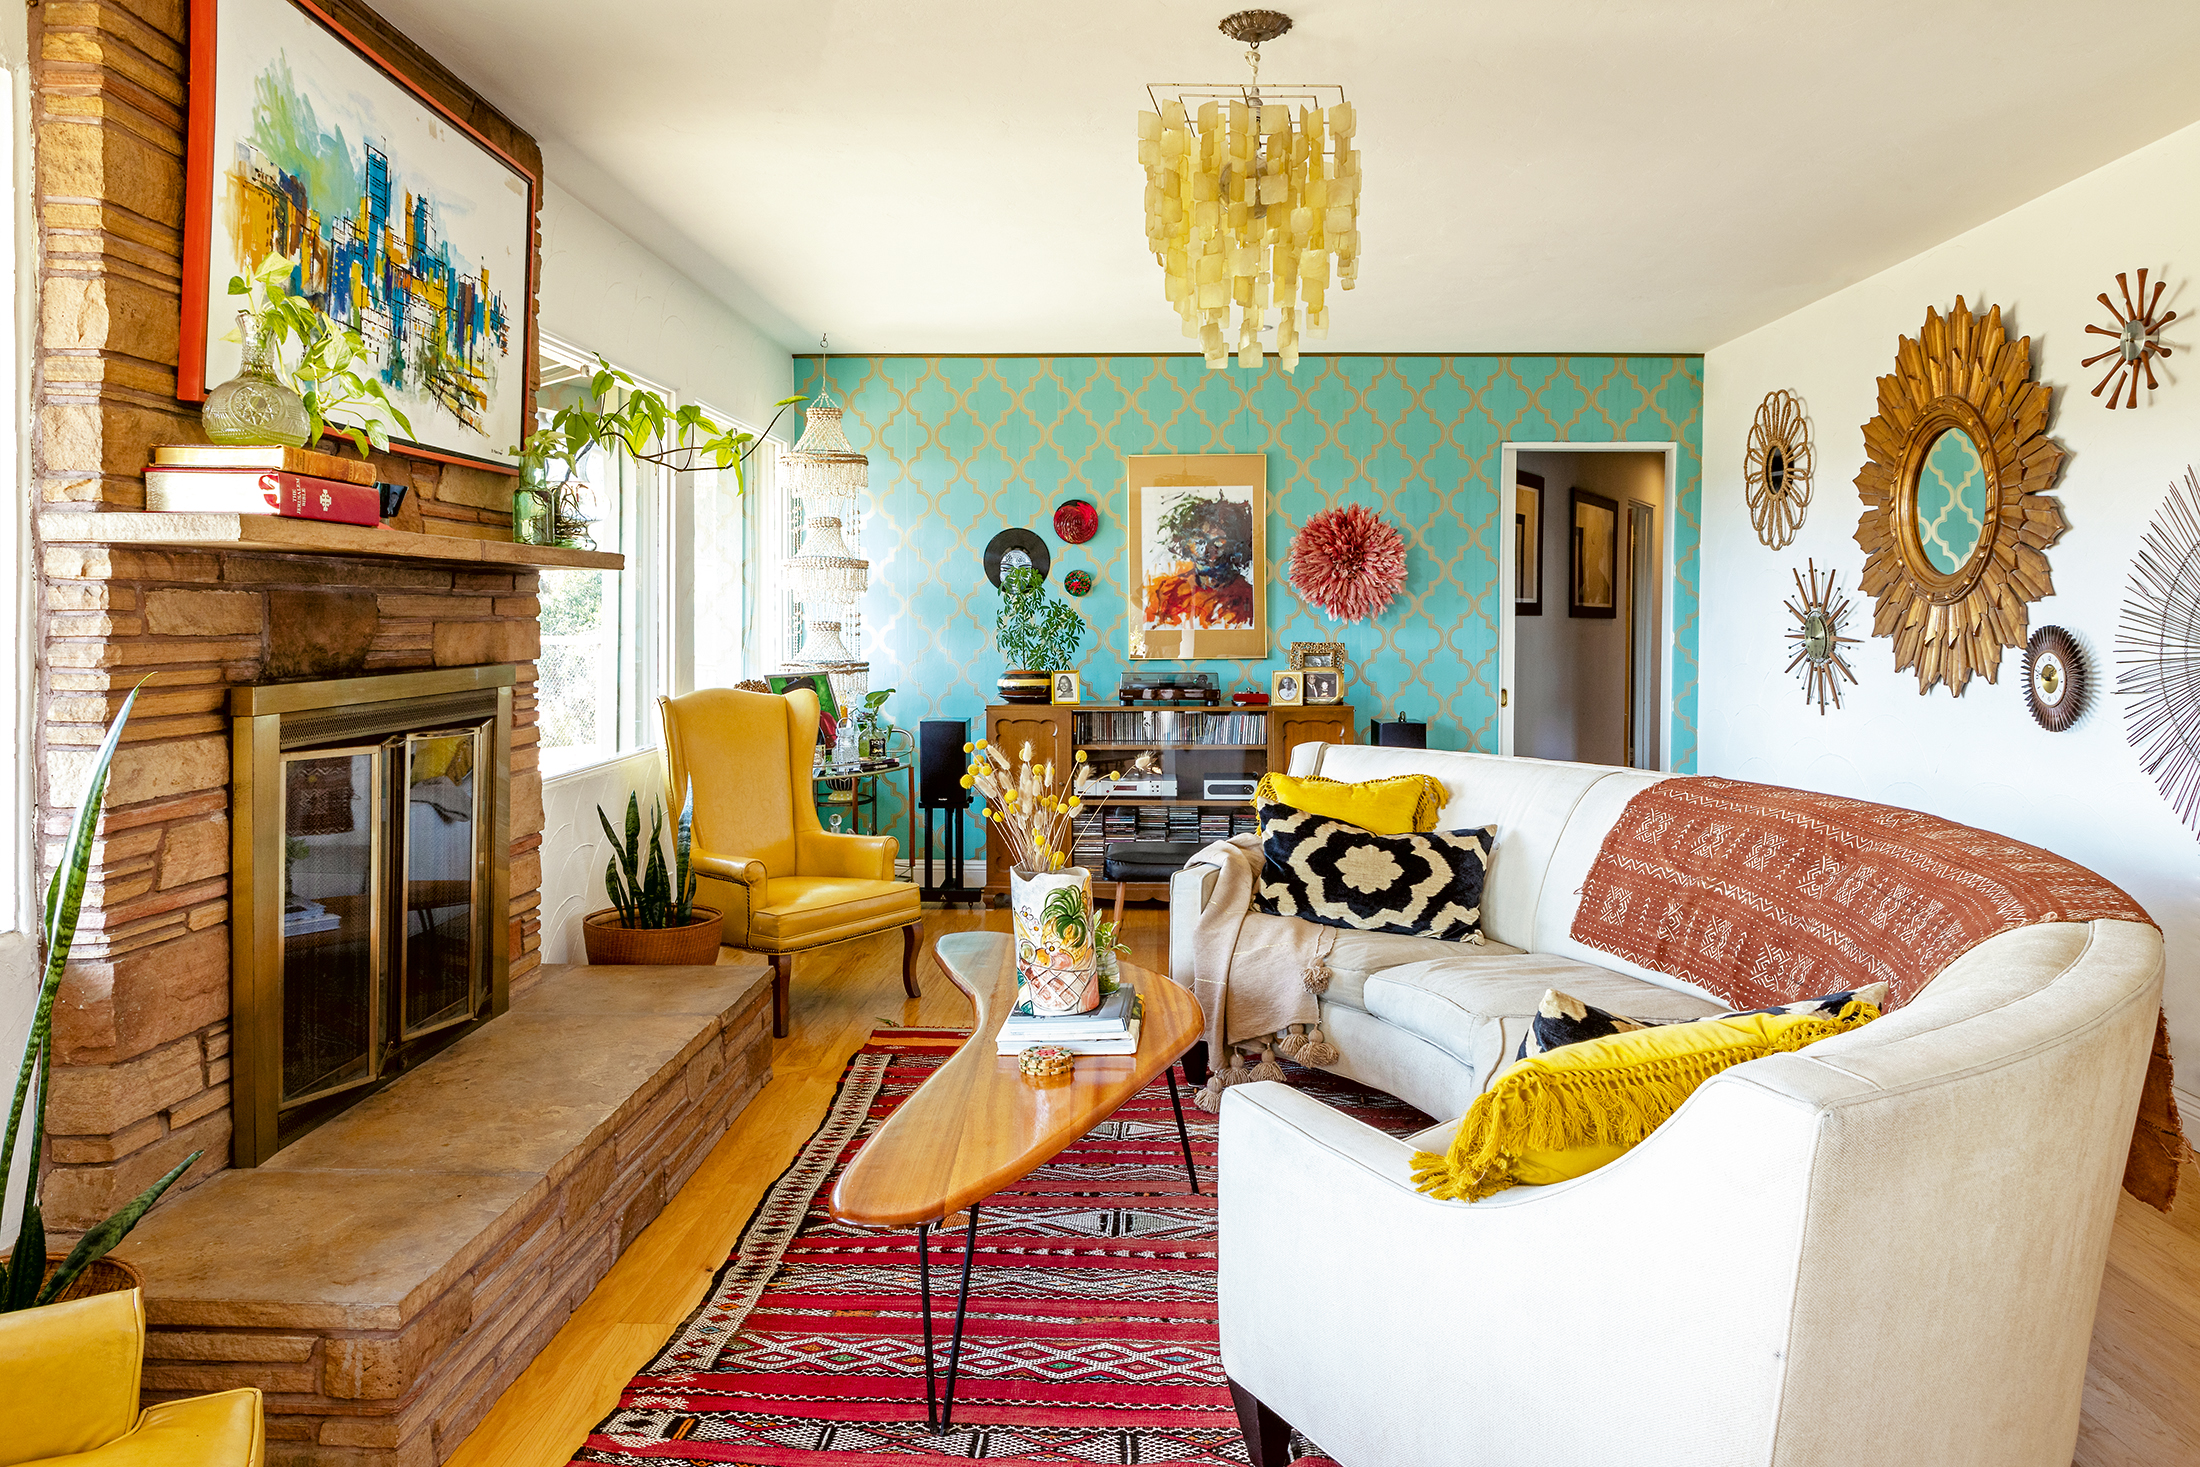 Follow The Yellow Brick Home - Vintage Style: The Boho Chic Decor